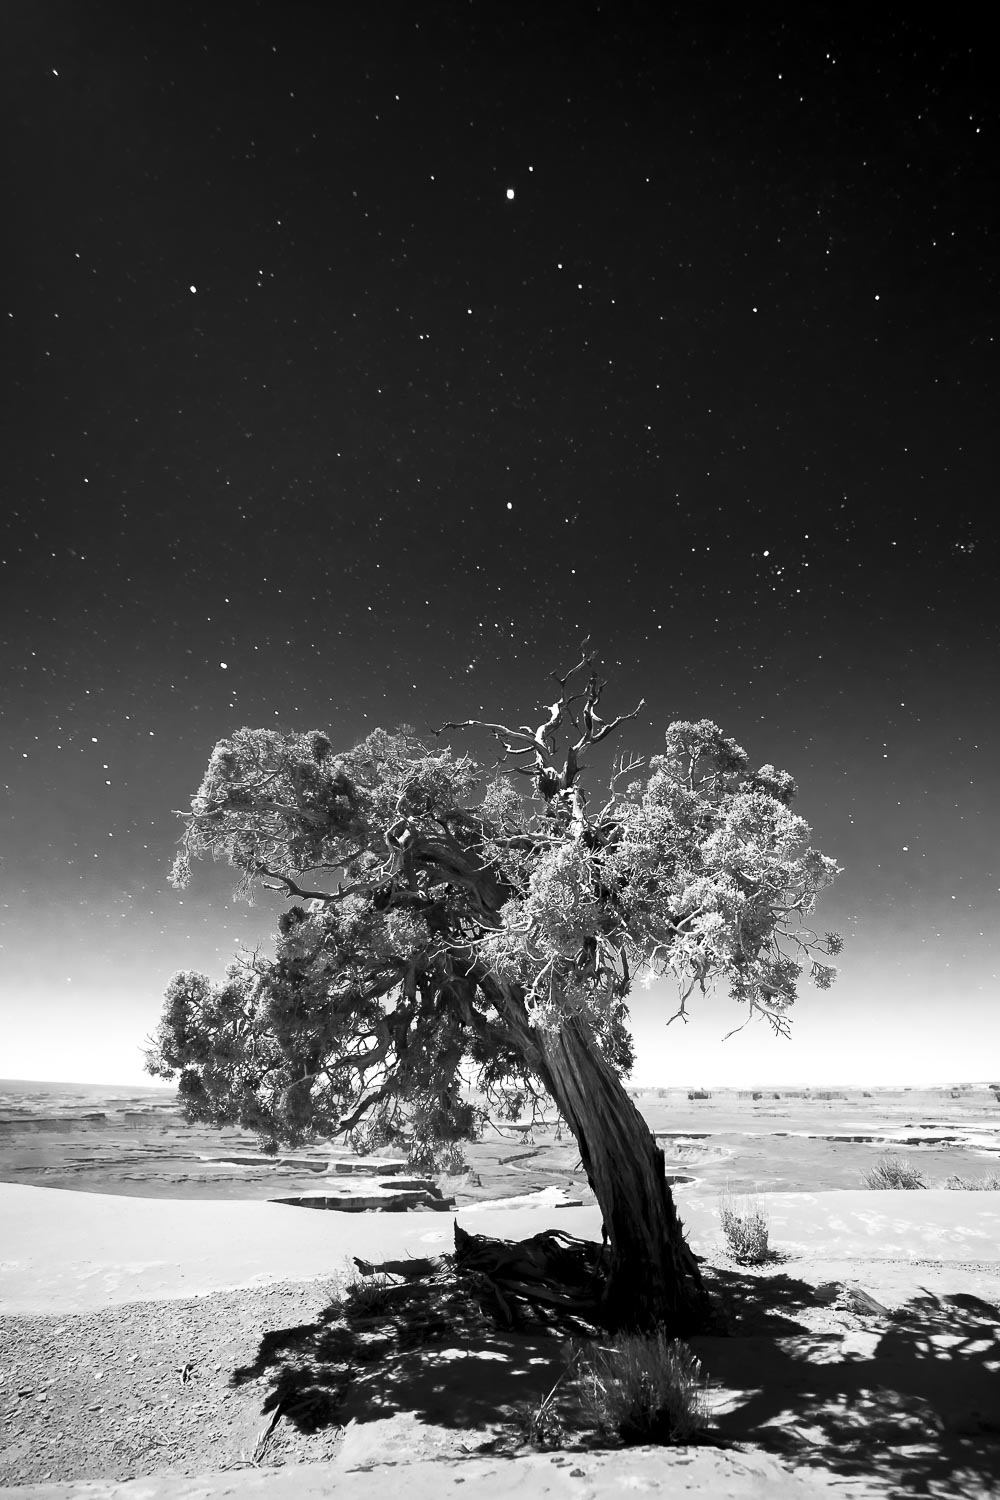 Night skies in Canyonlands National Park